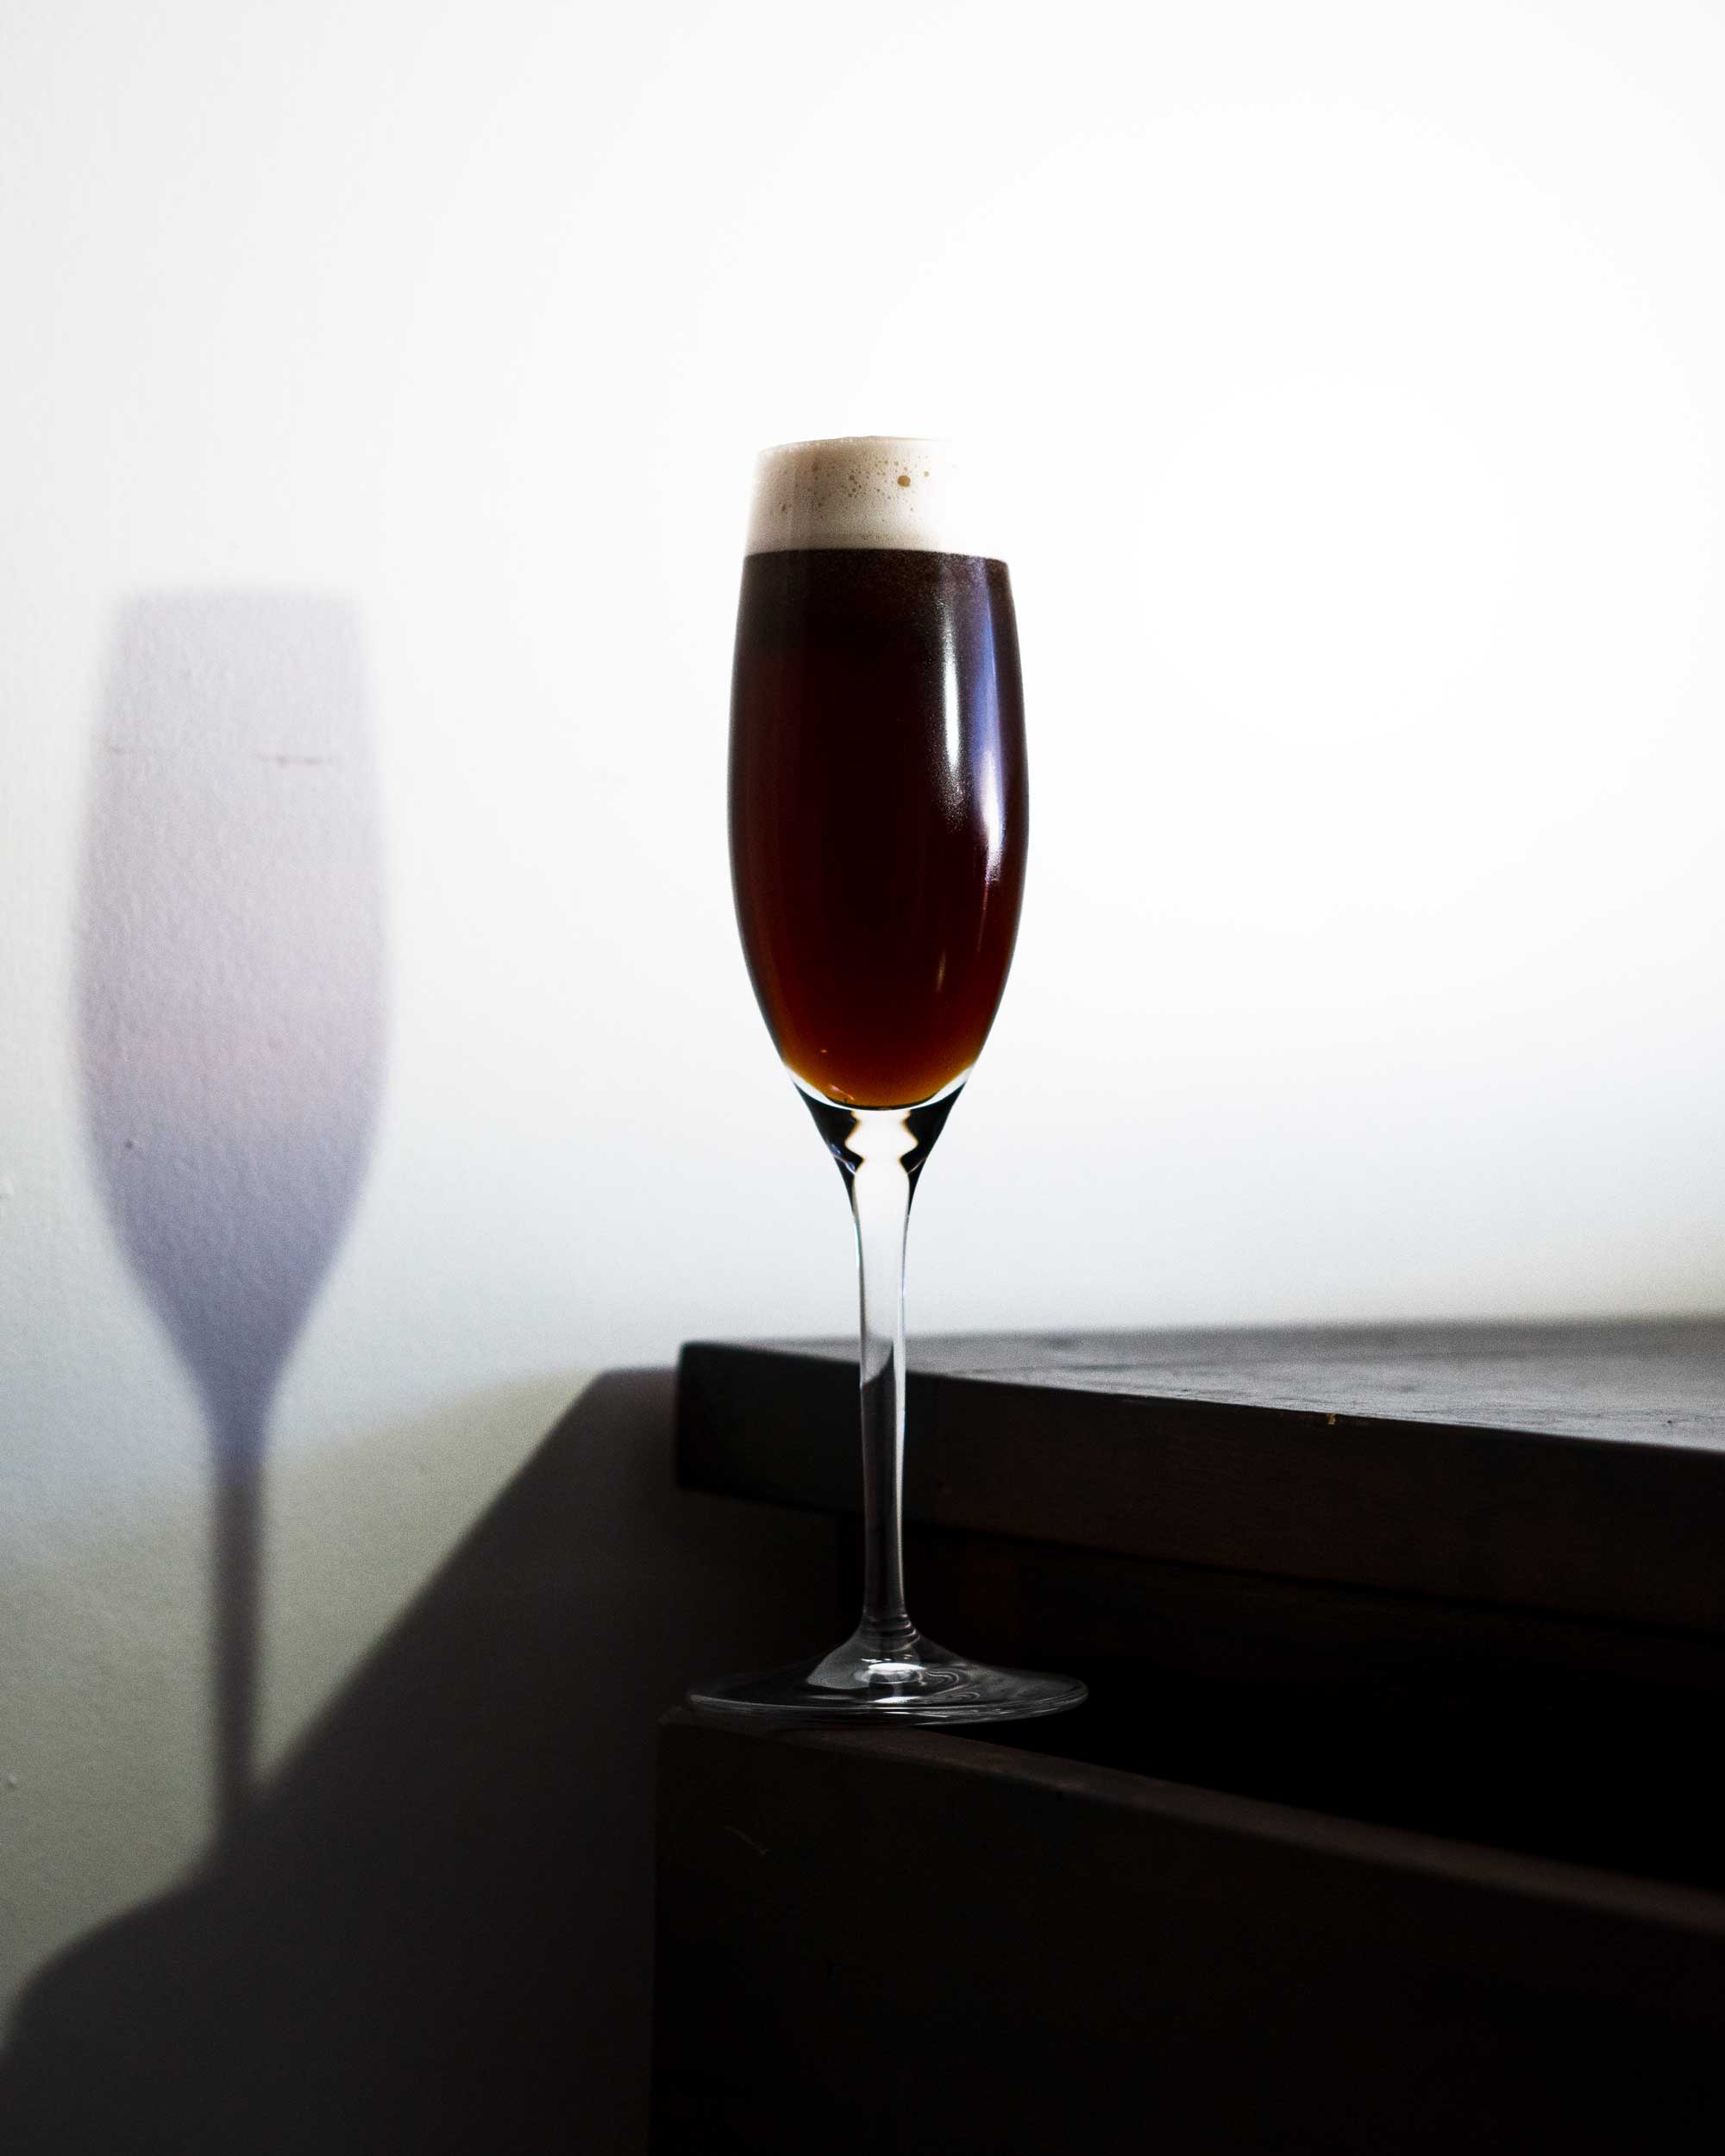 The Black Velvet cocktail begs the question: Why?